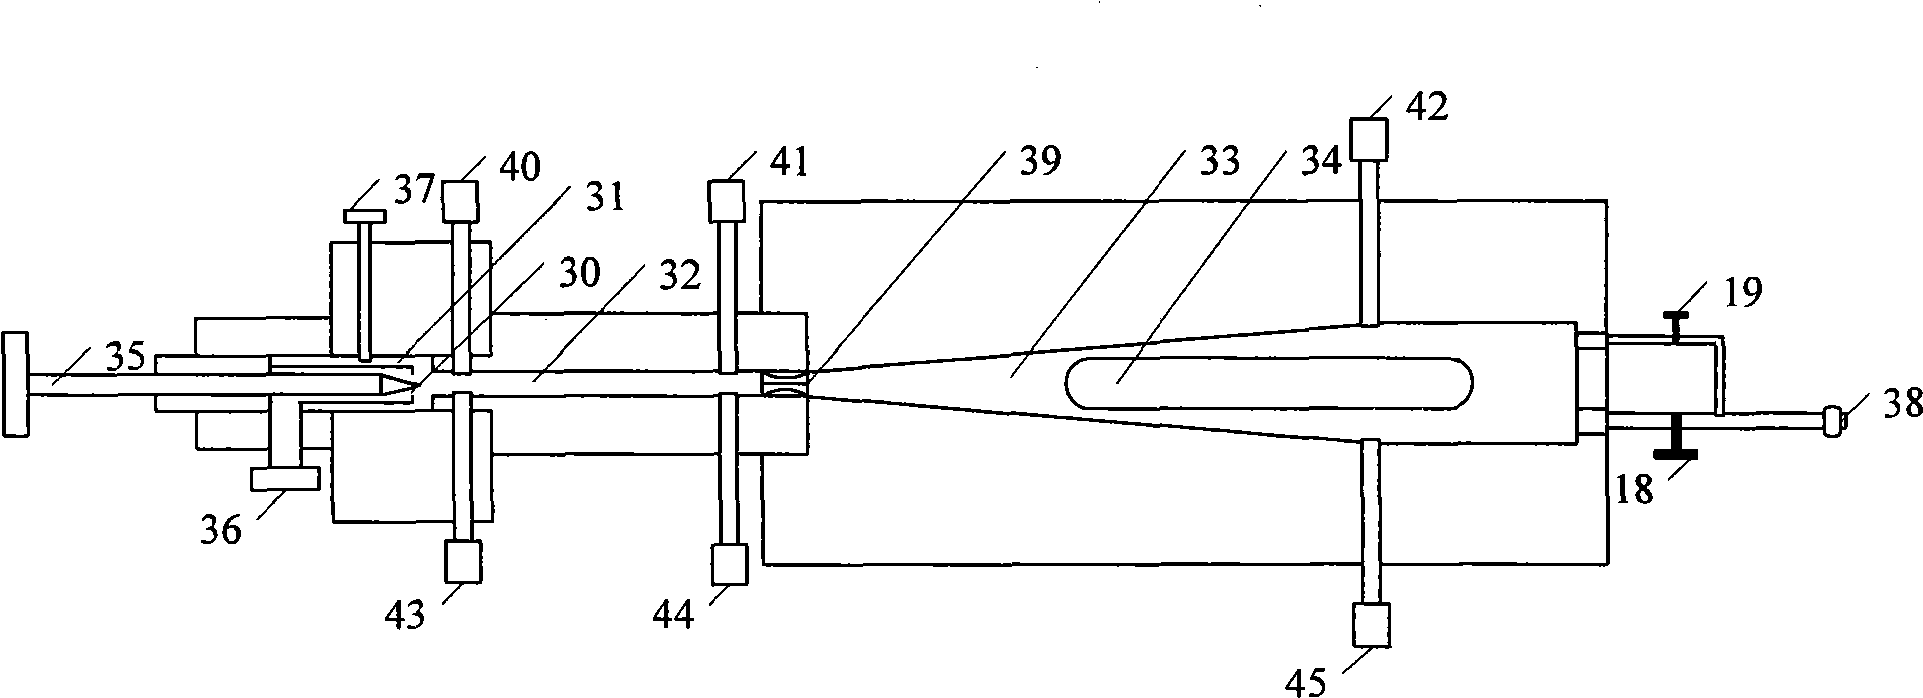 Visualization device for preparing gas hydrate in a spraying way